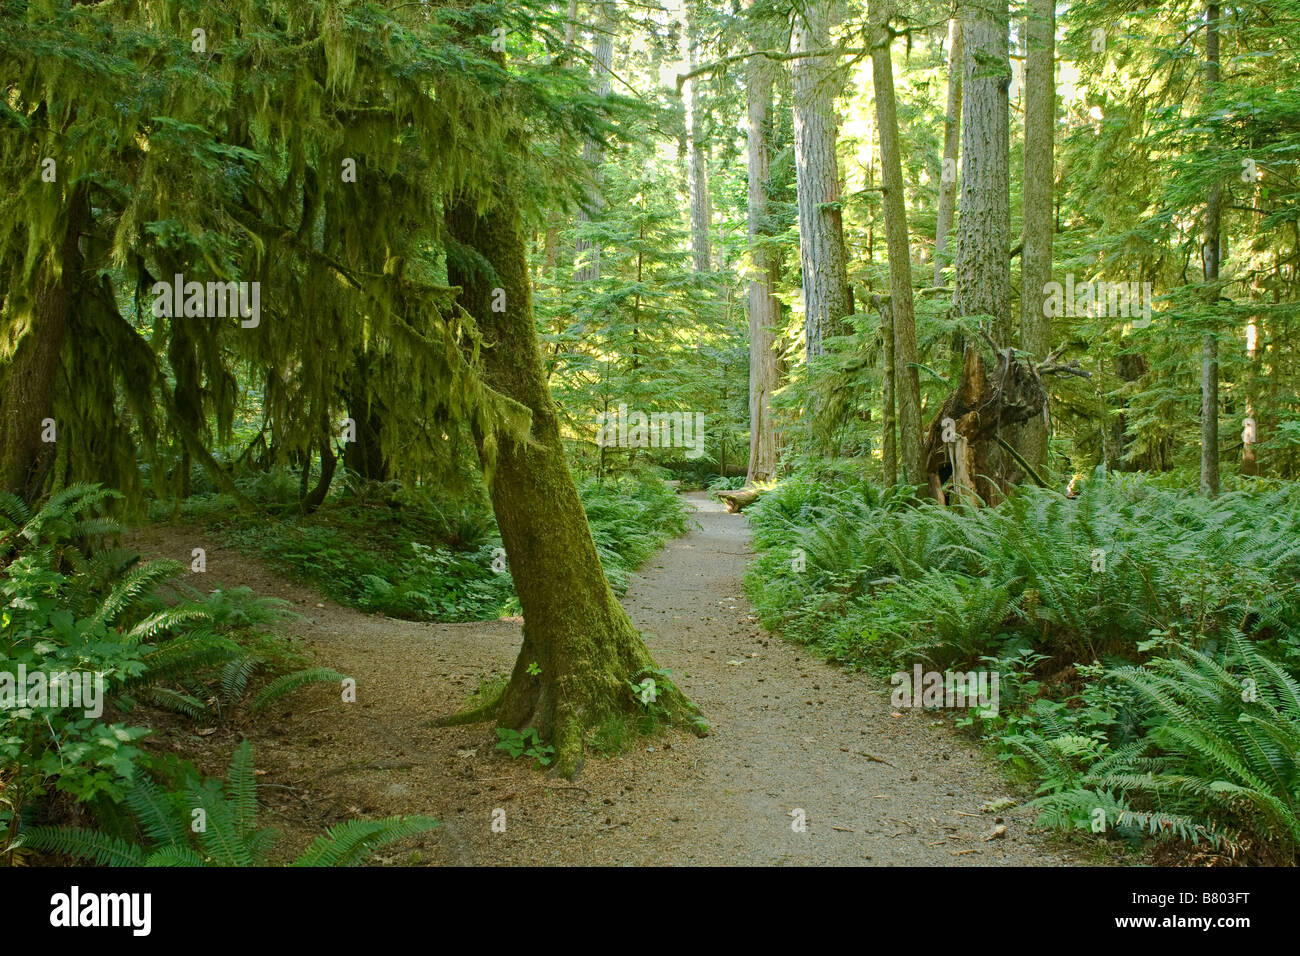 BRITISH COLUMBIA - Trail through old growth forest in Macmillan Provincial Park on Vancouver Island. Stock Photo